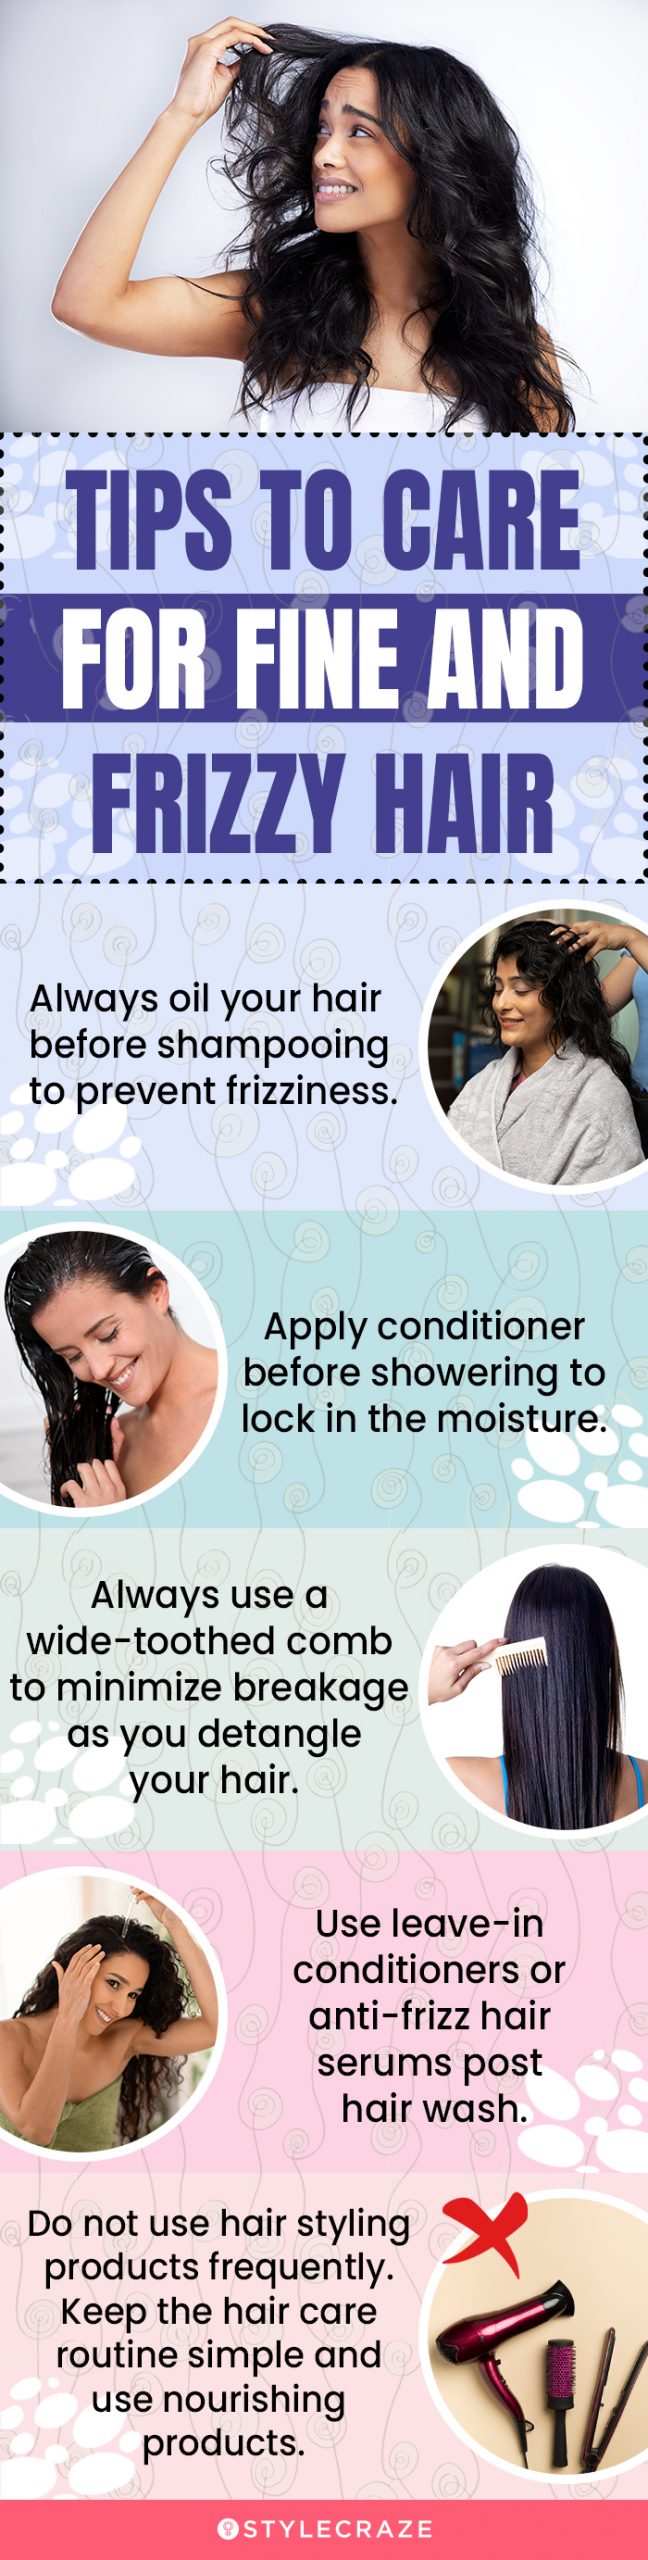 Tips To Care For Fine And Frizzy Hair (infographic)